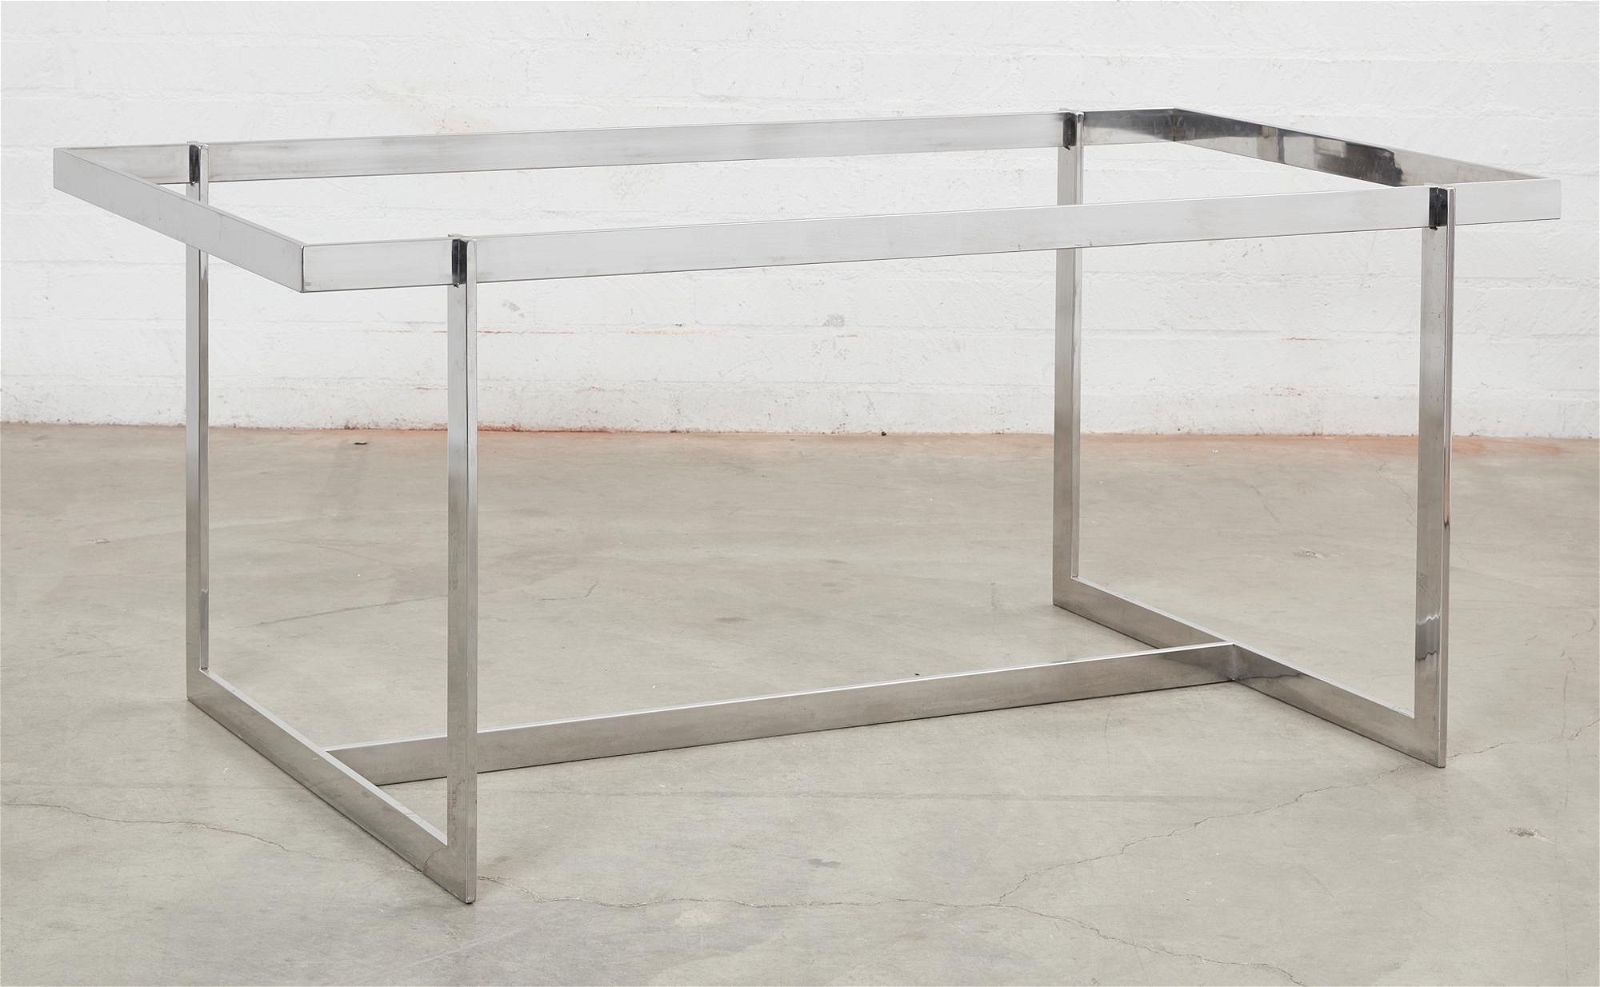 A MODERNIST STAINLESS STEEL TABLE